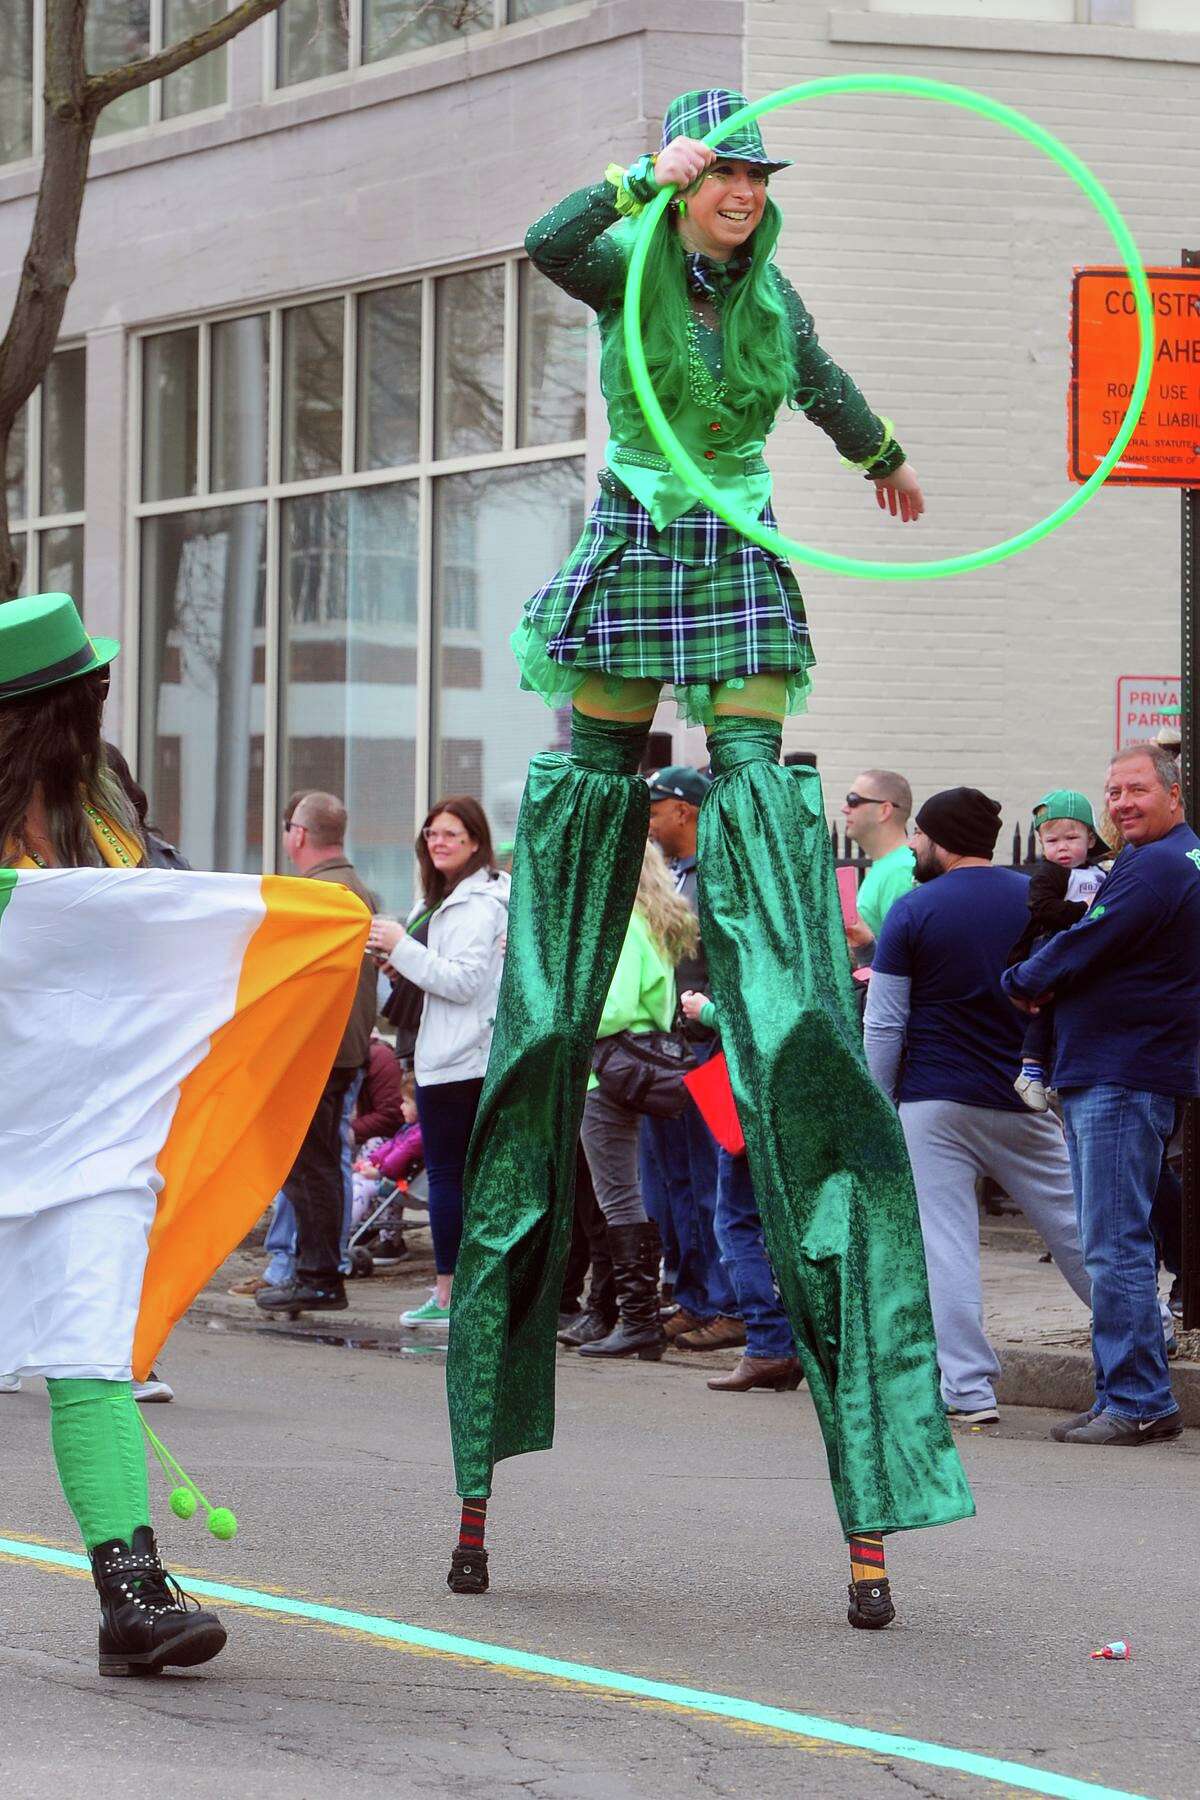 Scenes and faces from the Greater Bridgeport St. Patrick’s Day Parade, in downtown Bridgeport, Conn. March 15, 2019.